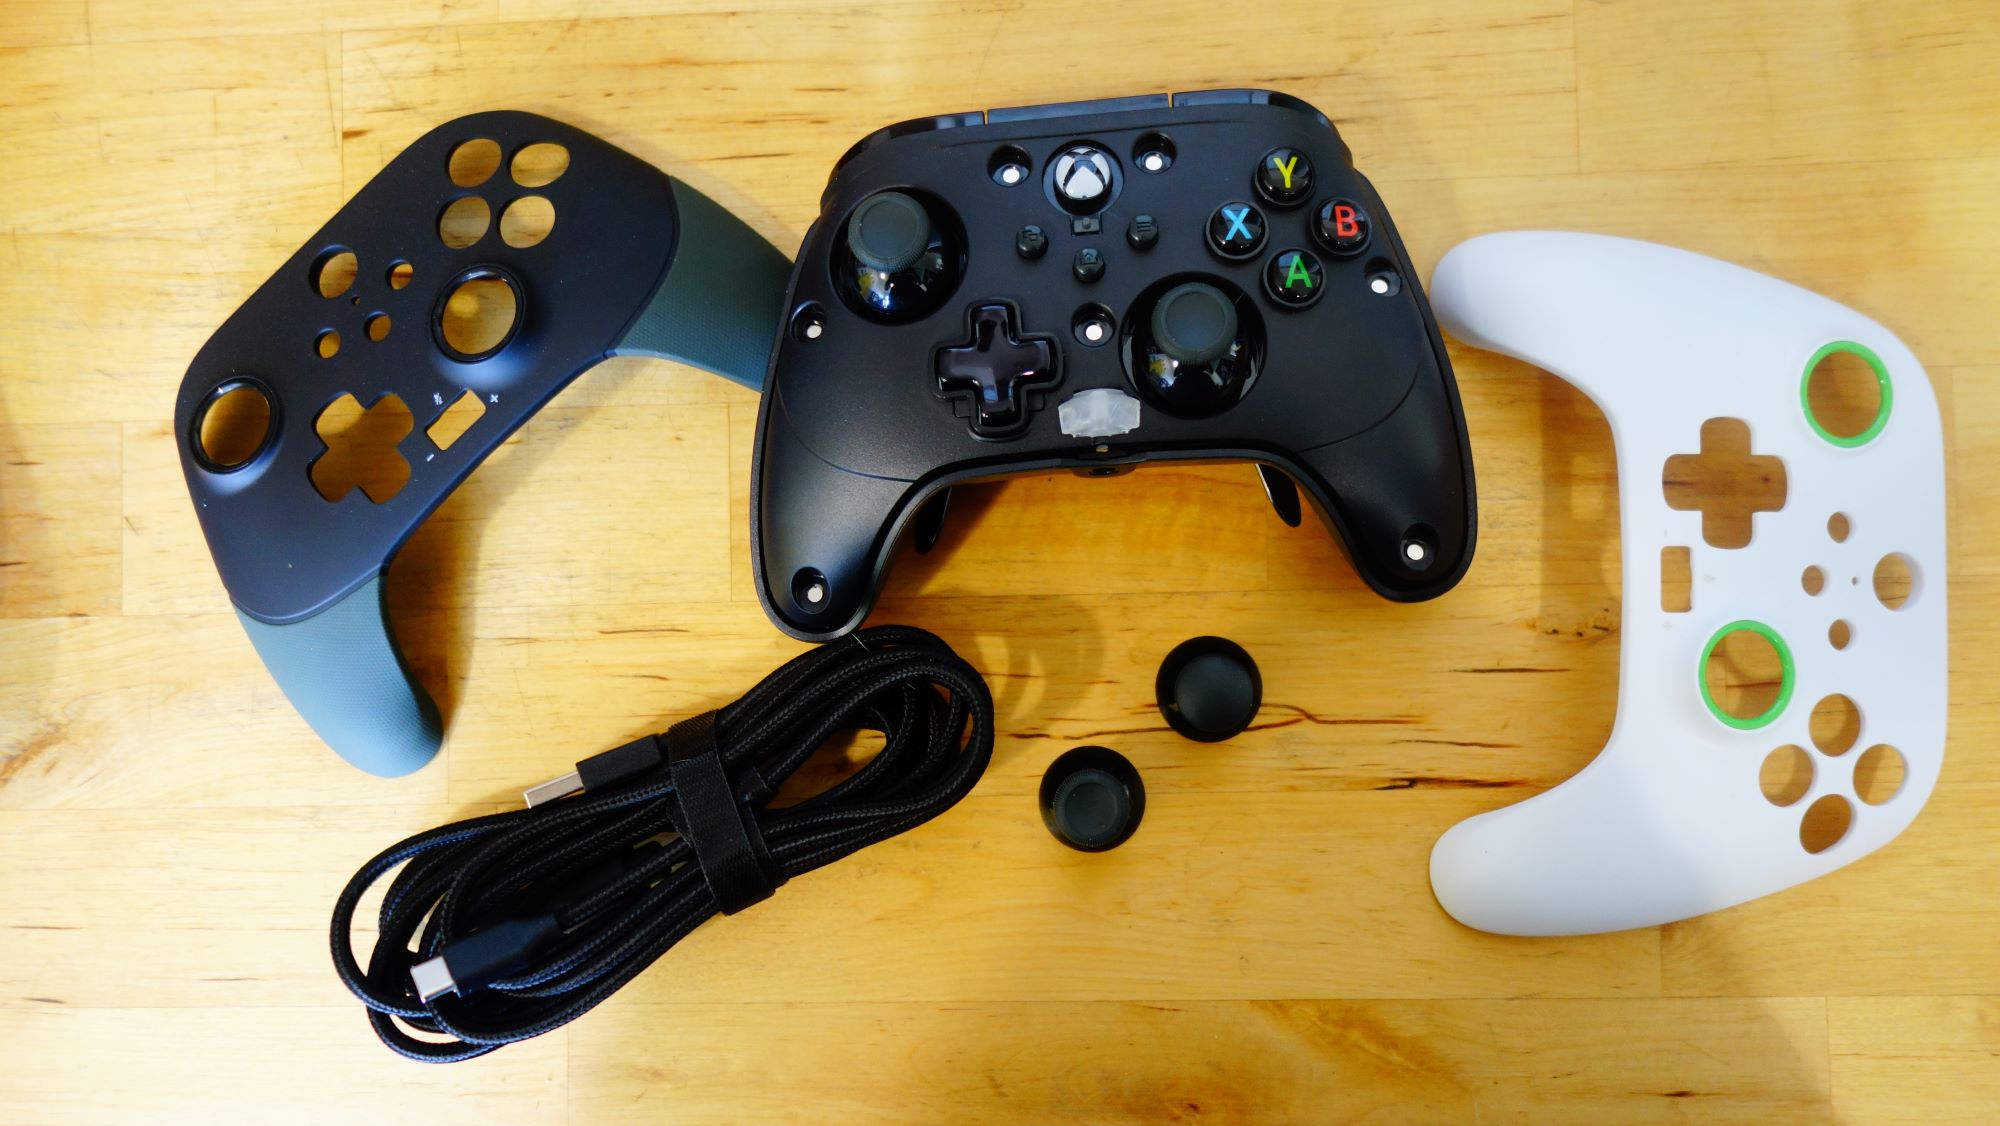 PowerA Fusion Pro 2 vs. Spectra Infinity vs. Enhanced Wired Xbox One  Controller Comparison Review 